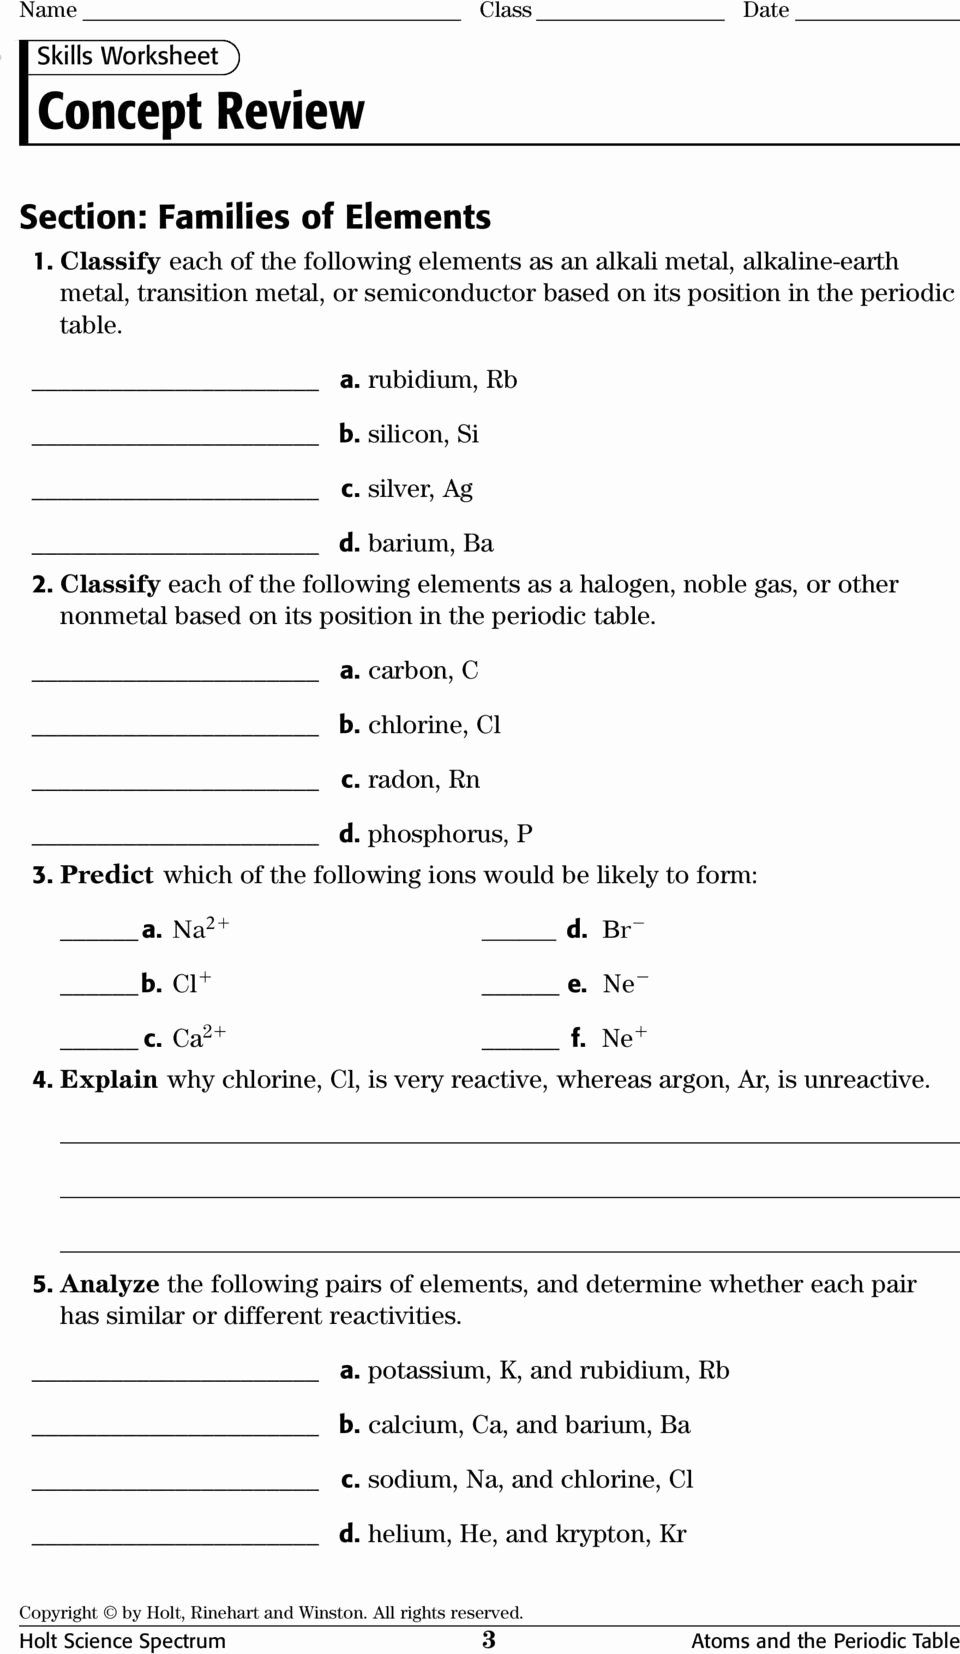 physical-science-fission-fusion-worksheet-classwork-answer-key-scienceworksheets